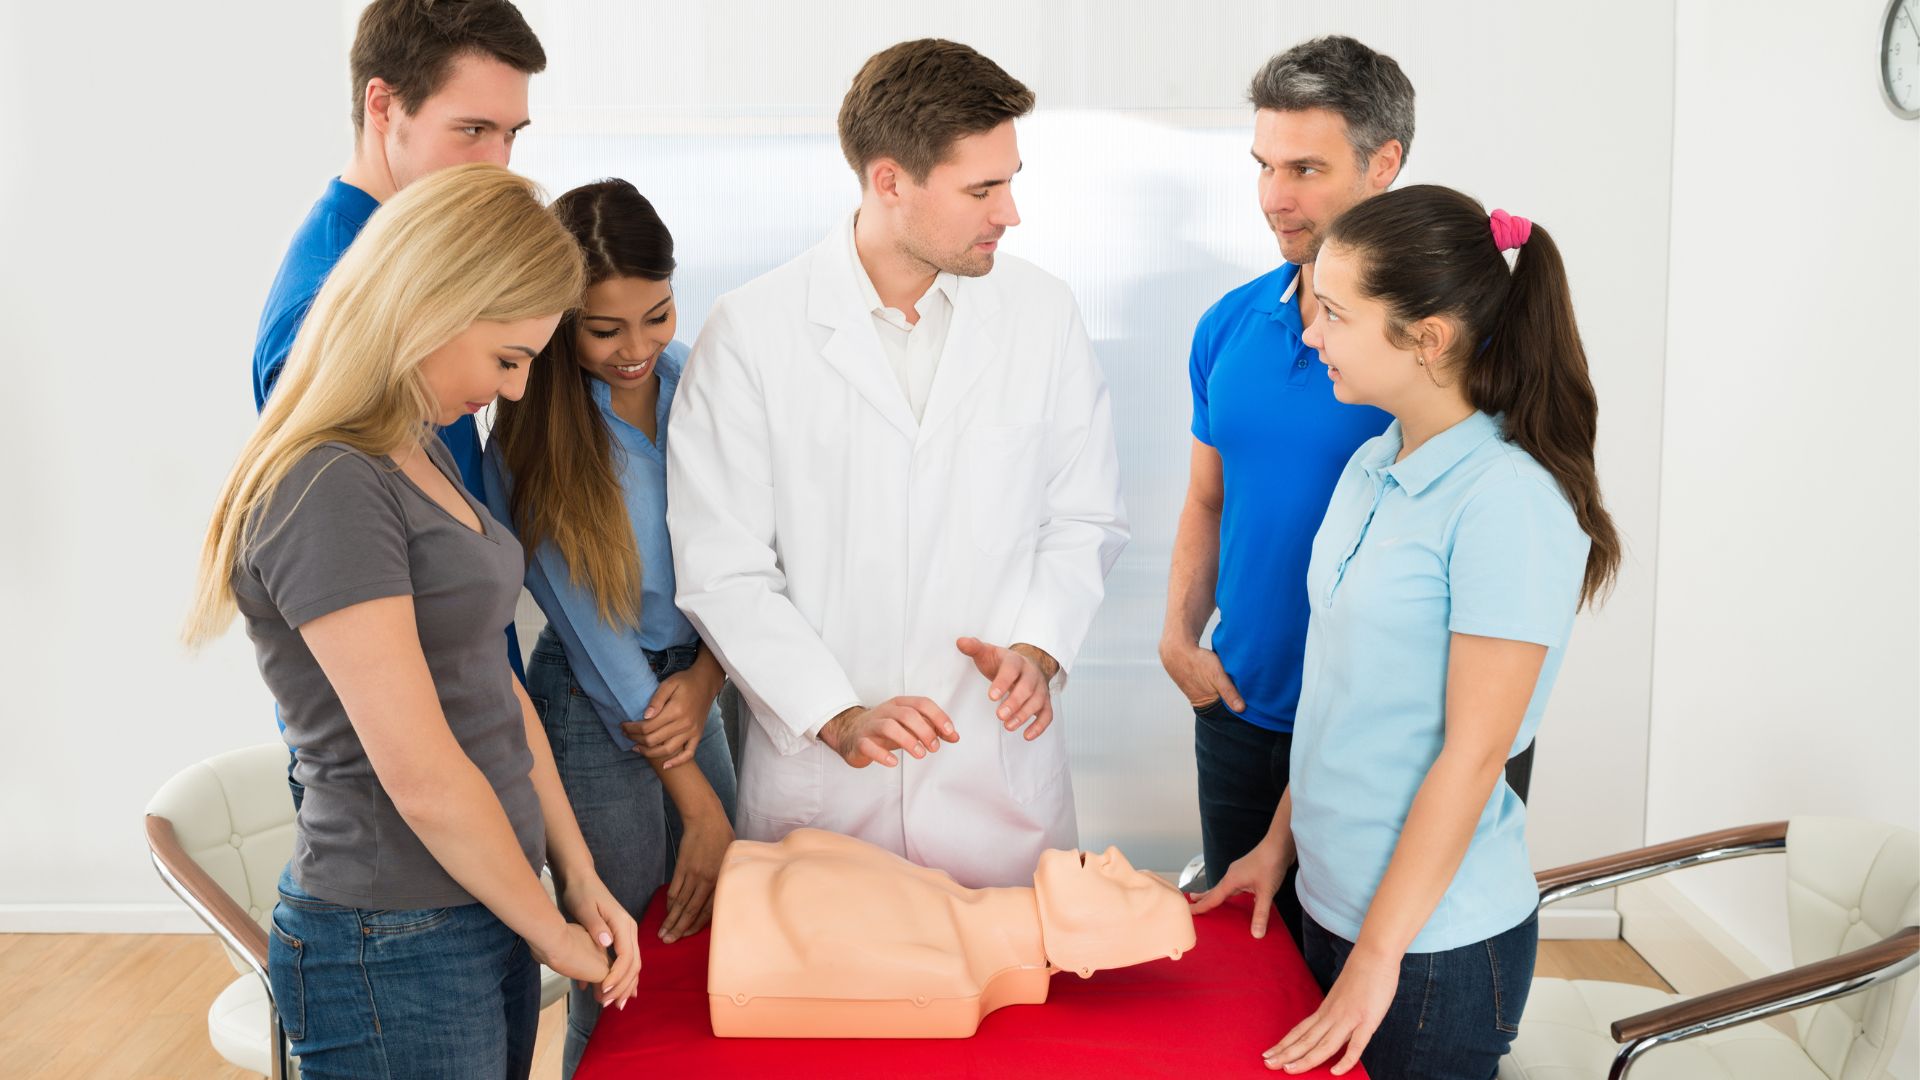 the-purpose-of-cpr-how-the-leading-life-saving-method-works.jpg